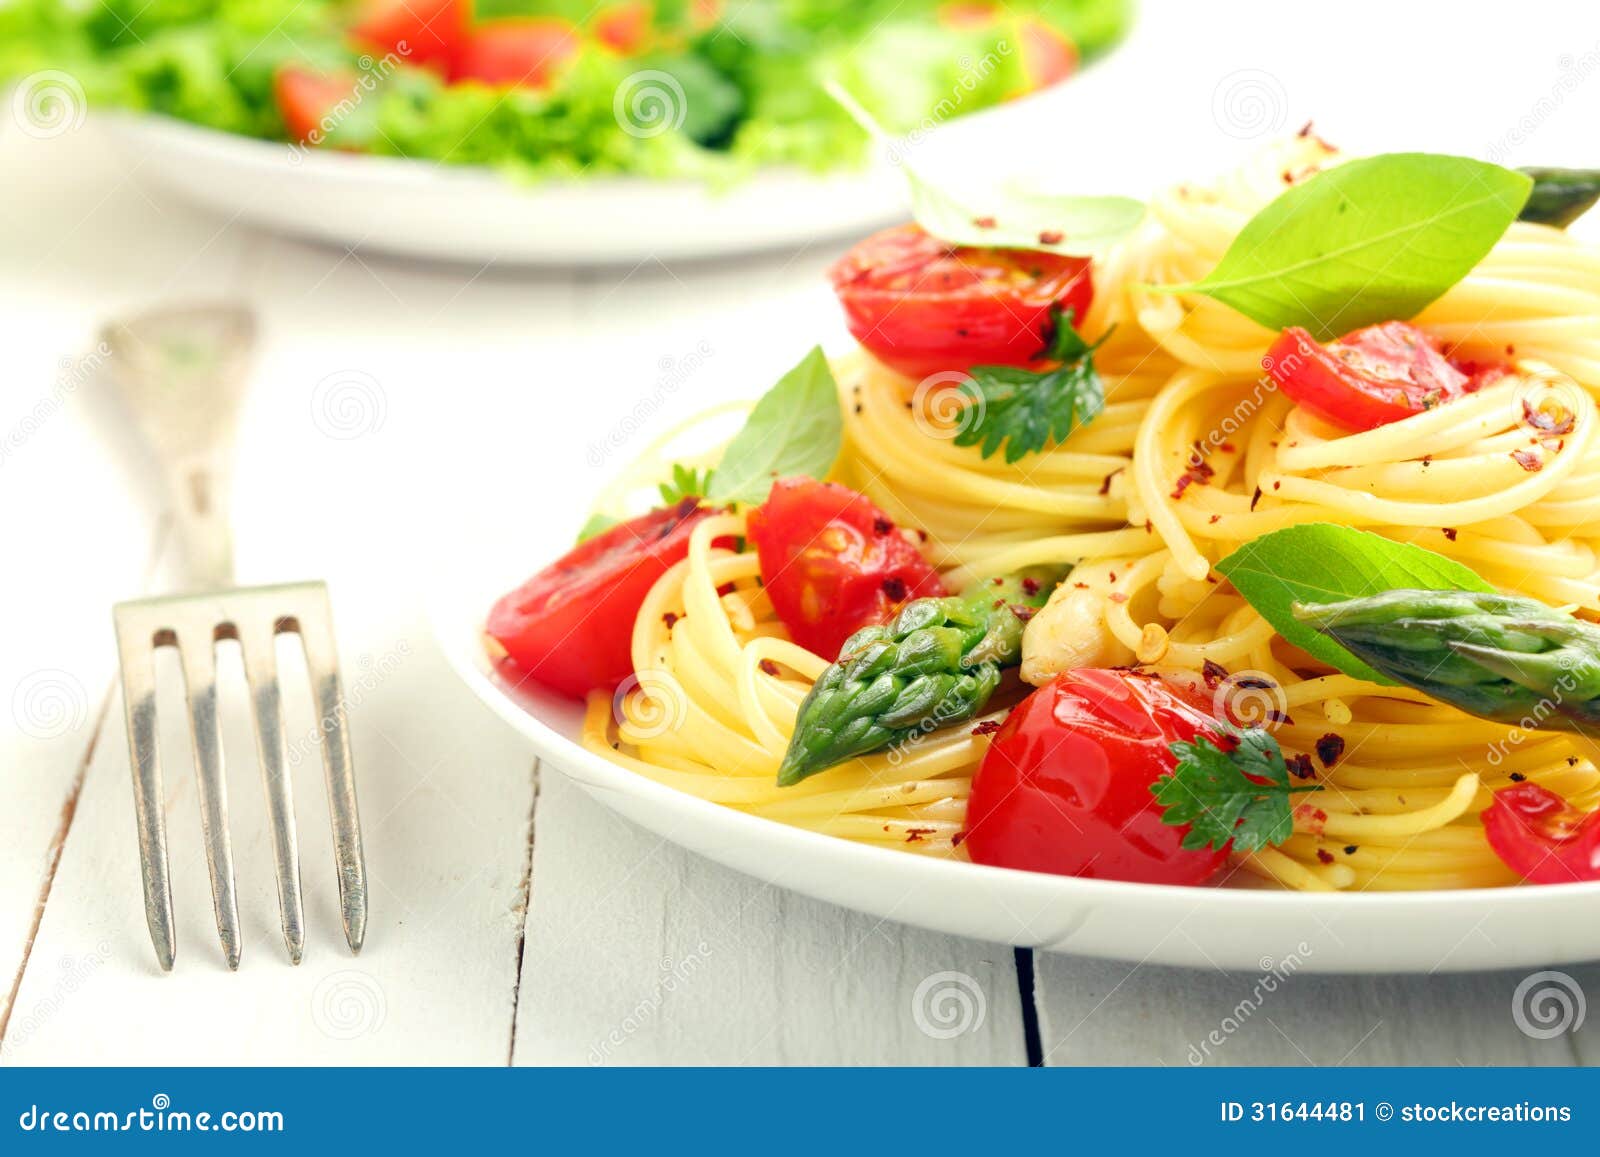 coiled spaghetti with tomato and basil